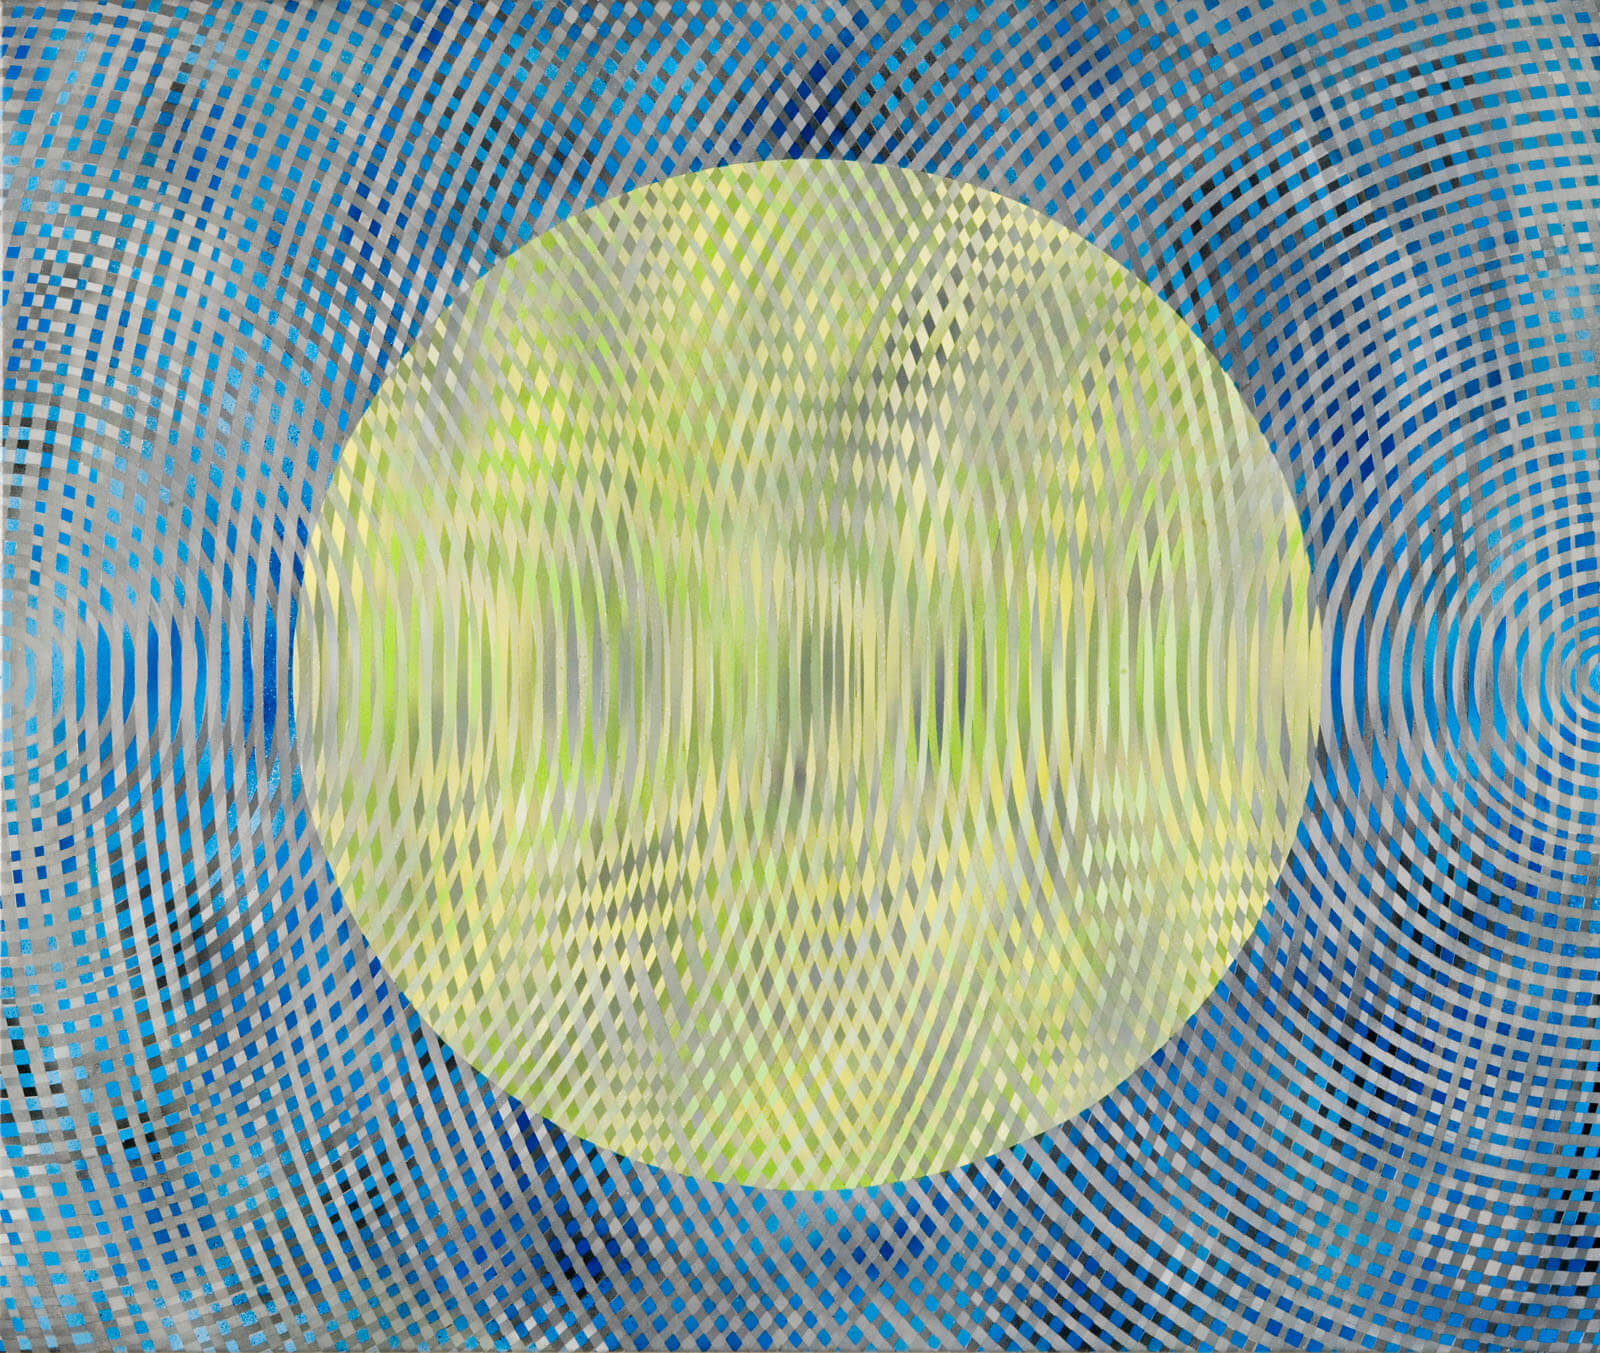 sonic-no.8-oil-and-acrylic-on-canvas-107x-127cm-2008-1